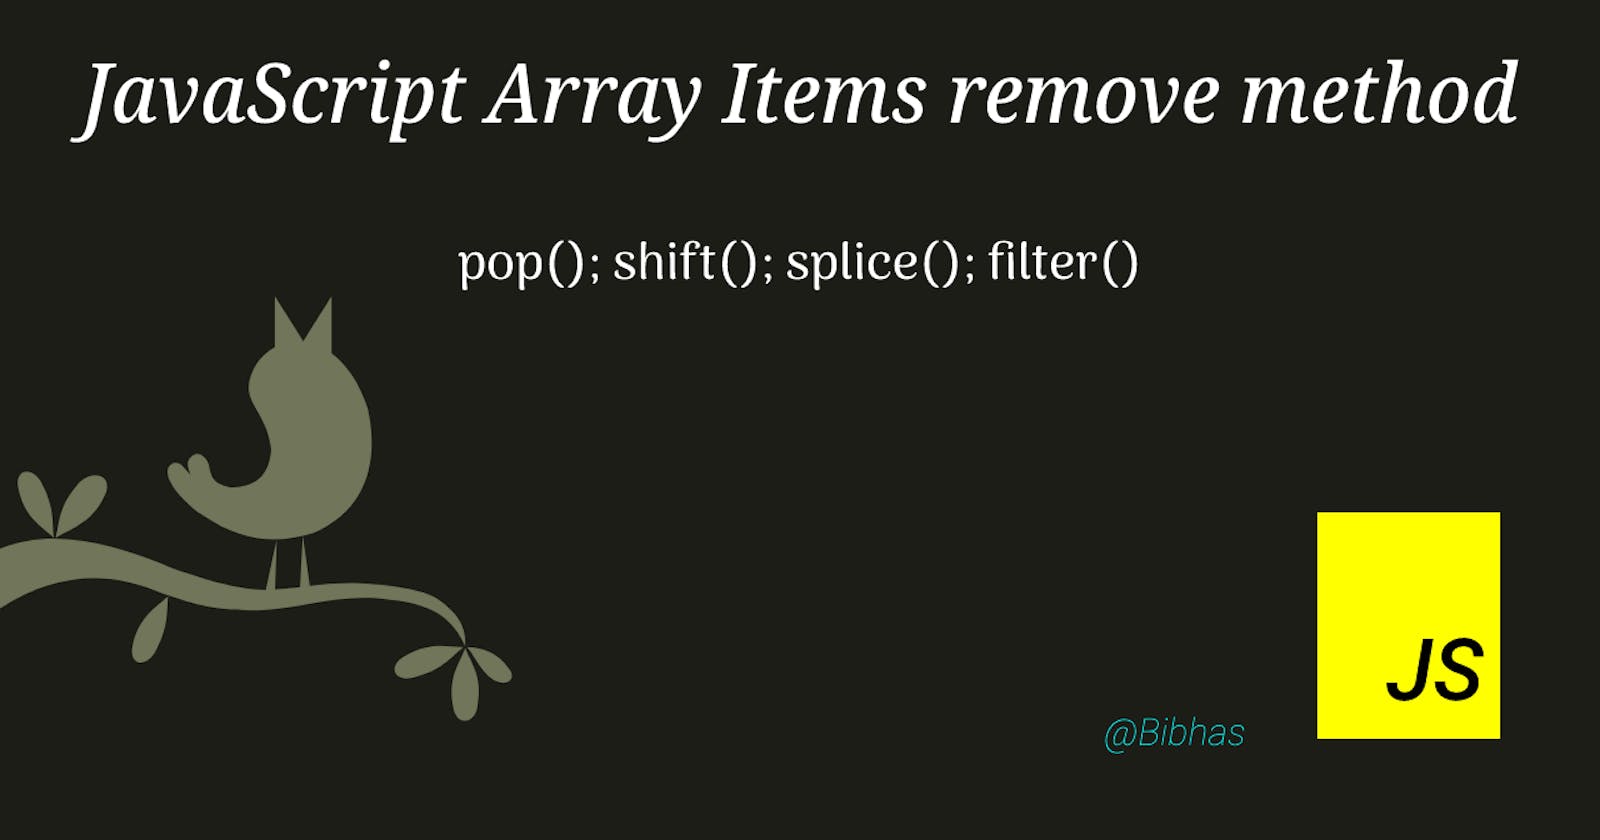 JavaScript Array: Remove Items Methods - pop(); shift(); splice(); and filter();